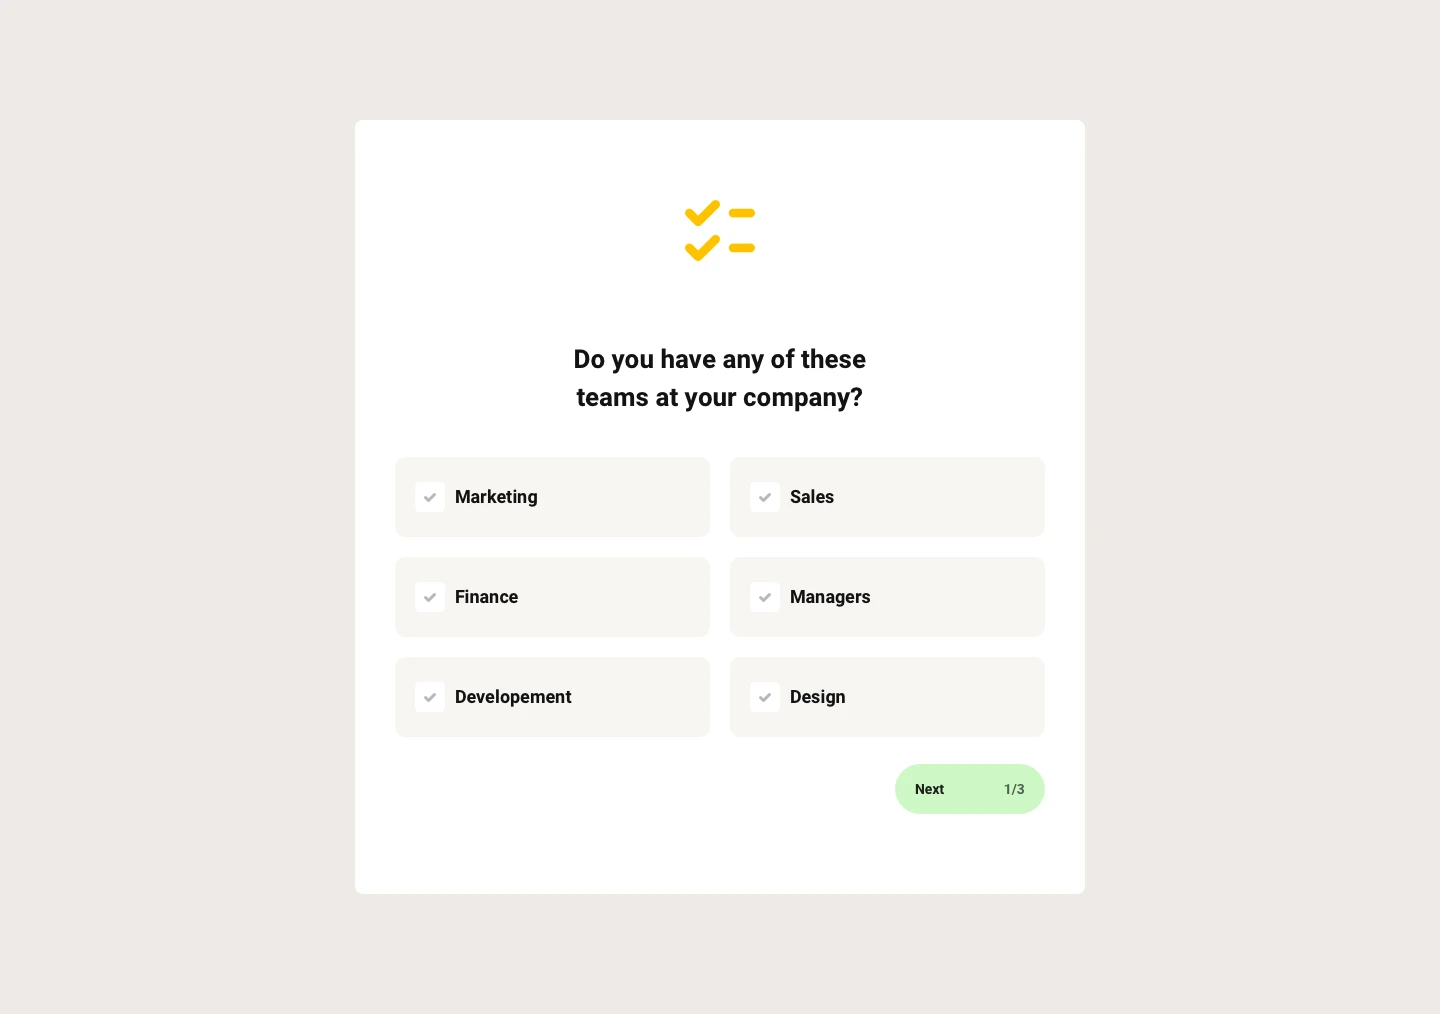 Project Management Tool UI Kit - Minimal and clean UI Kit design, 12 screens for you to get started. Each screen is fully customizable, exceptionally easy to use and carefully assembled in Sketch and Adobe XD.